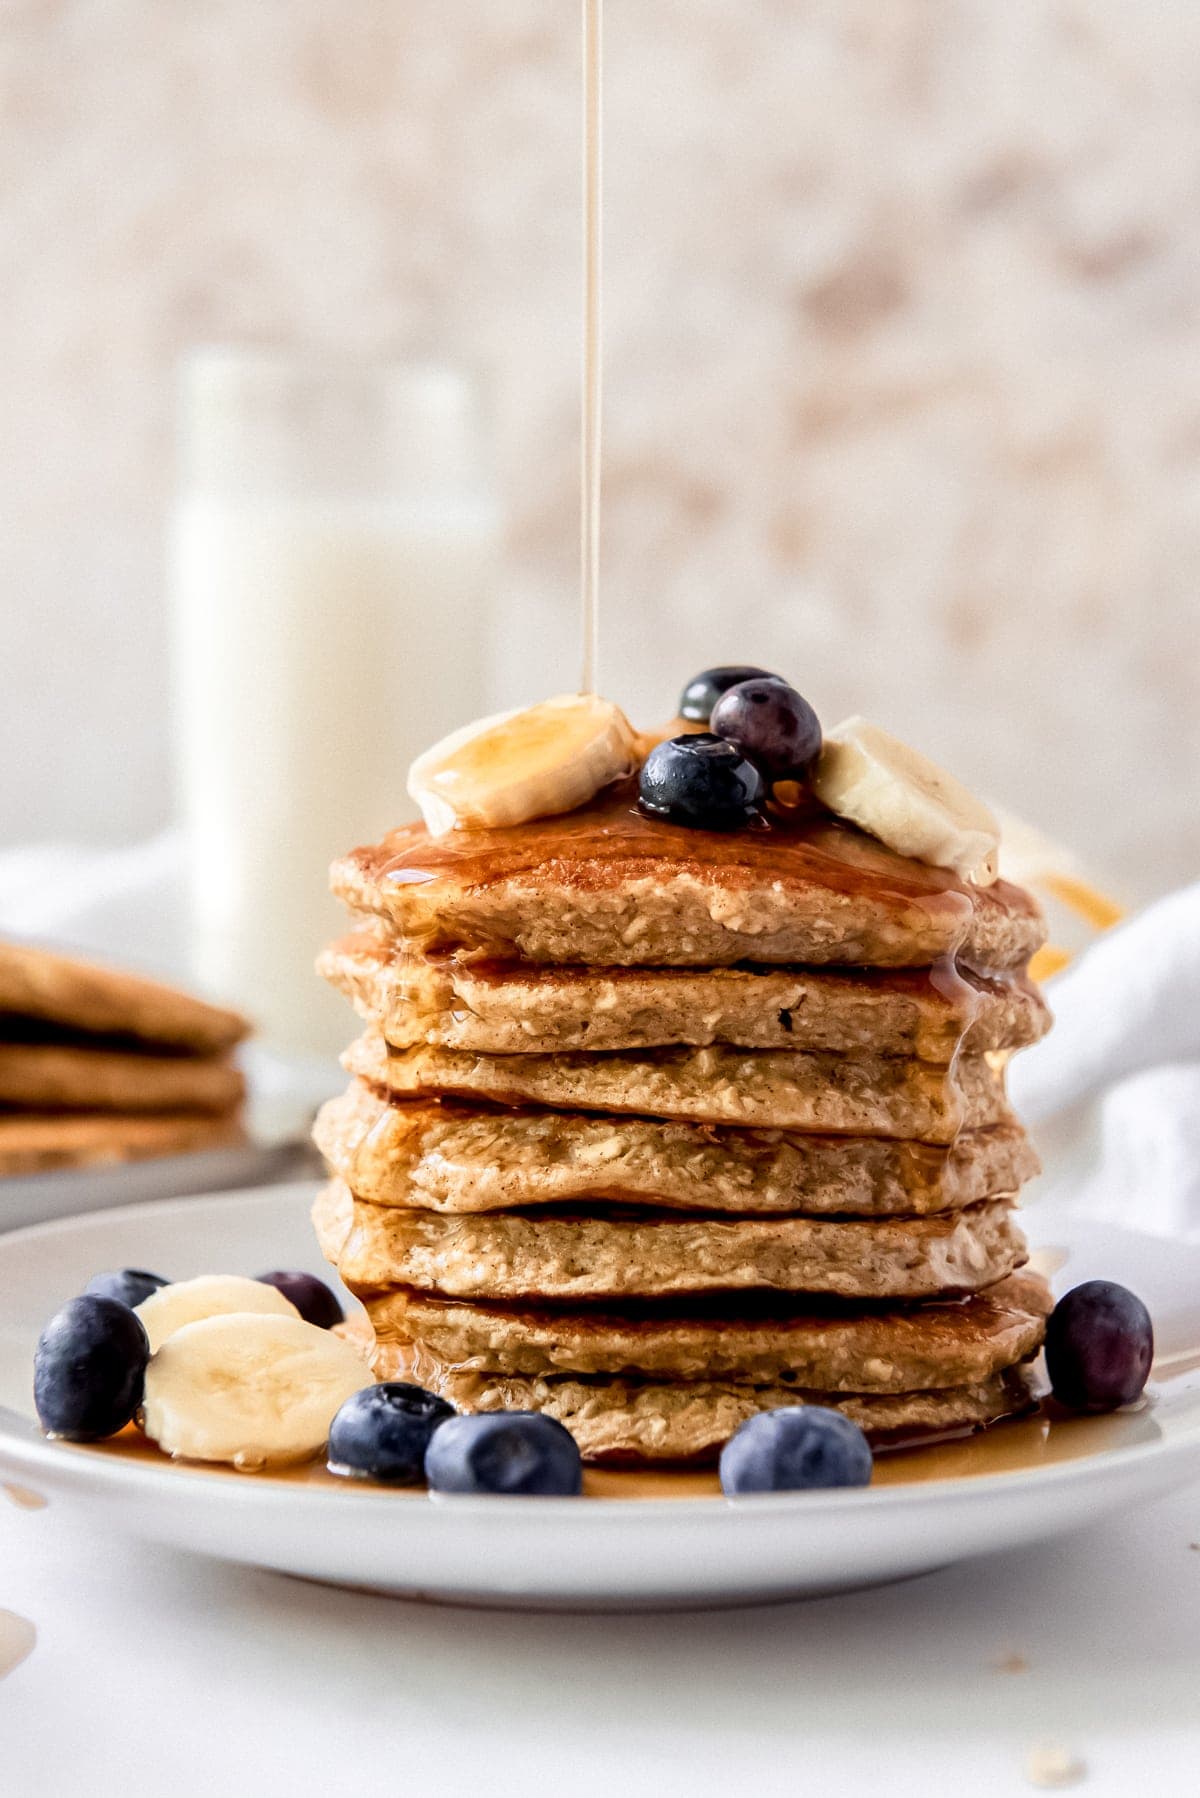 maple syrup poured on a stack of banana oatmeal pancakes with sliced bananas and blueberries